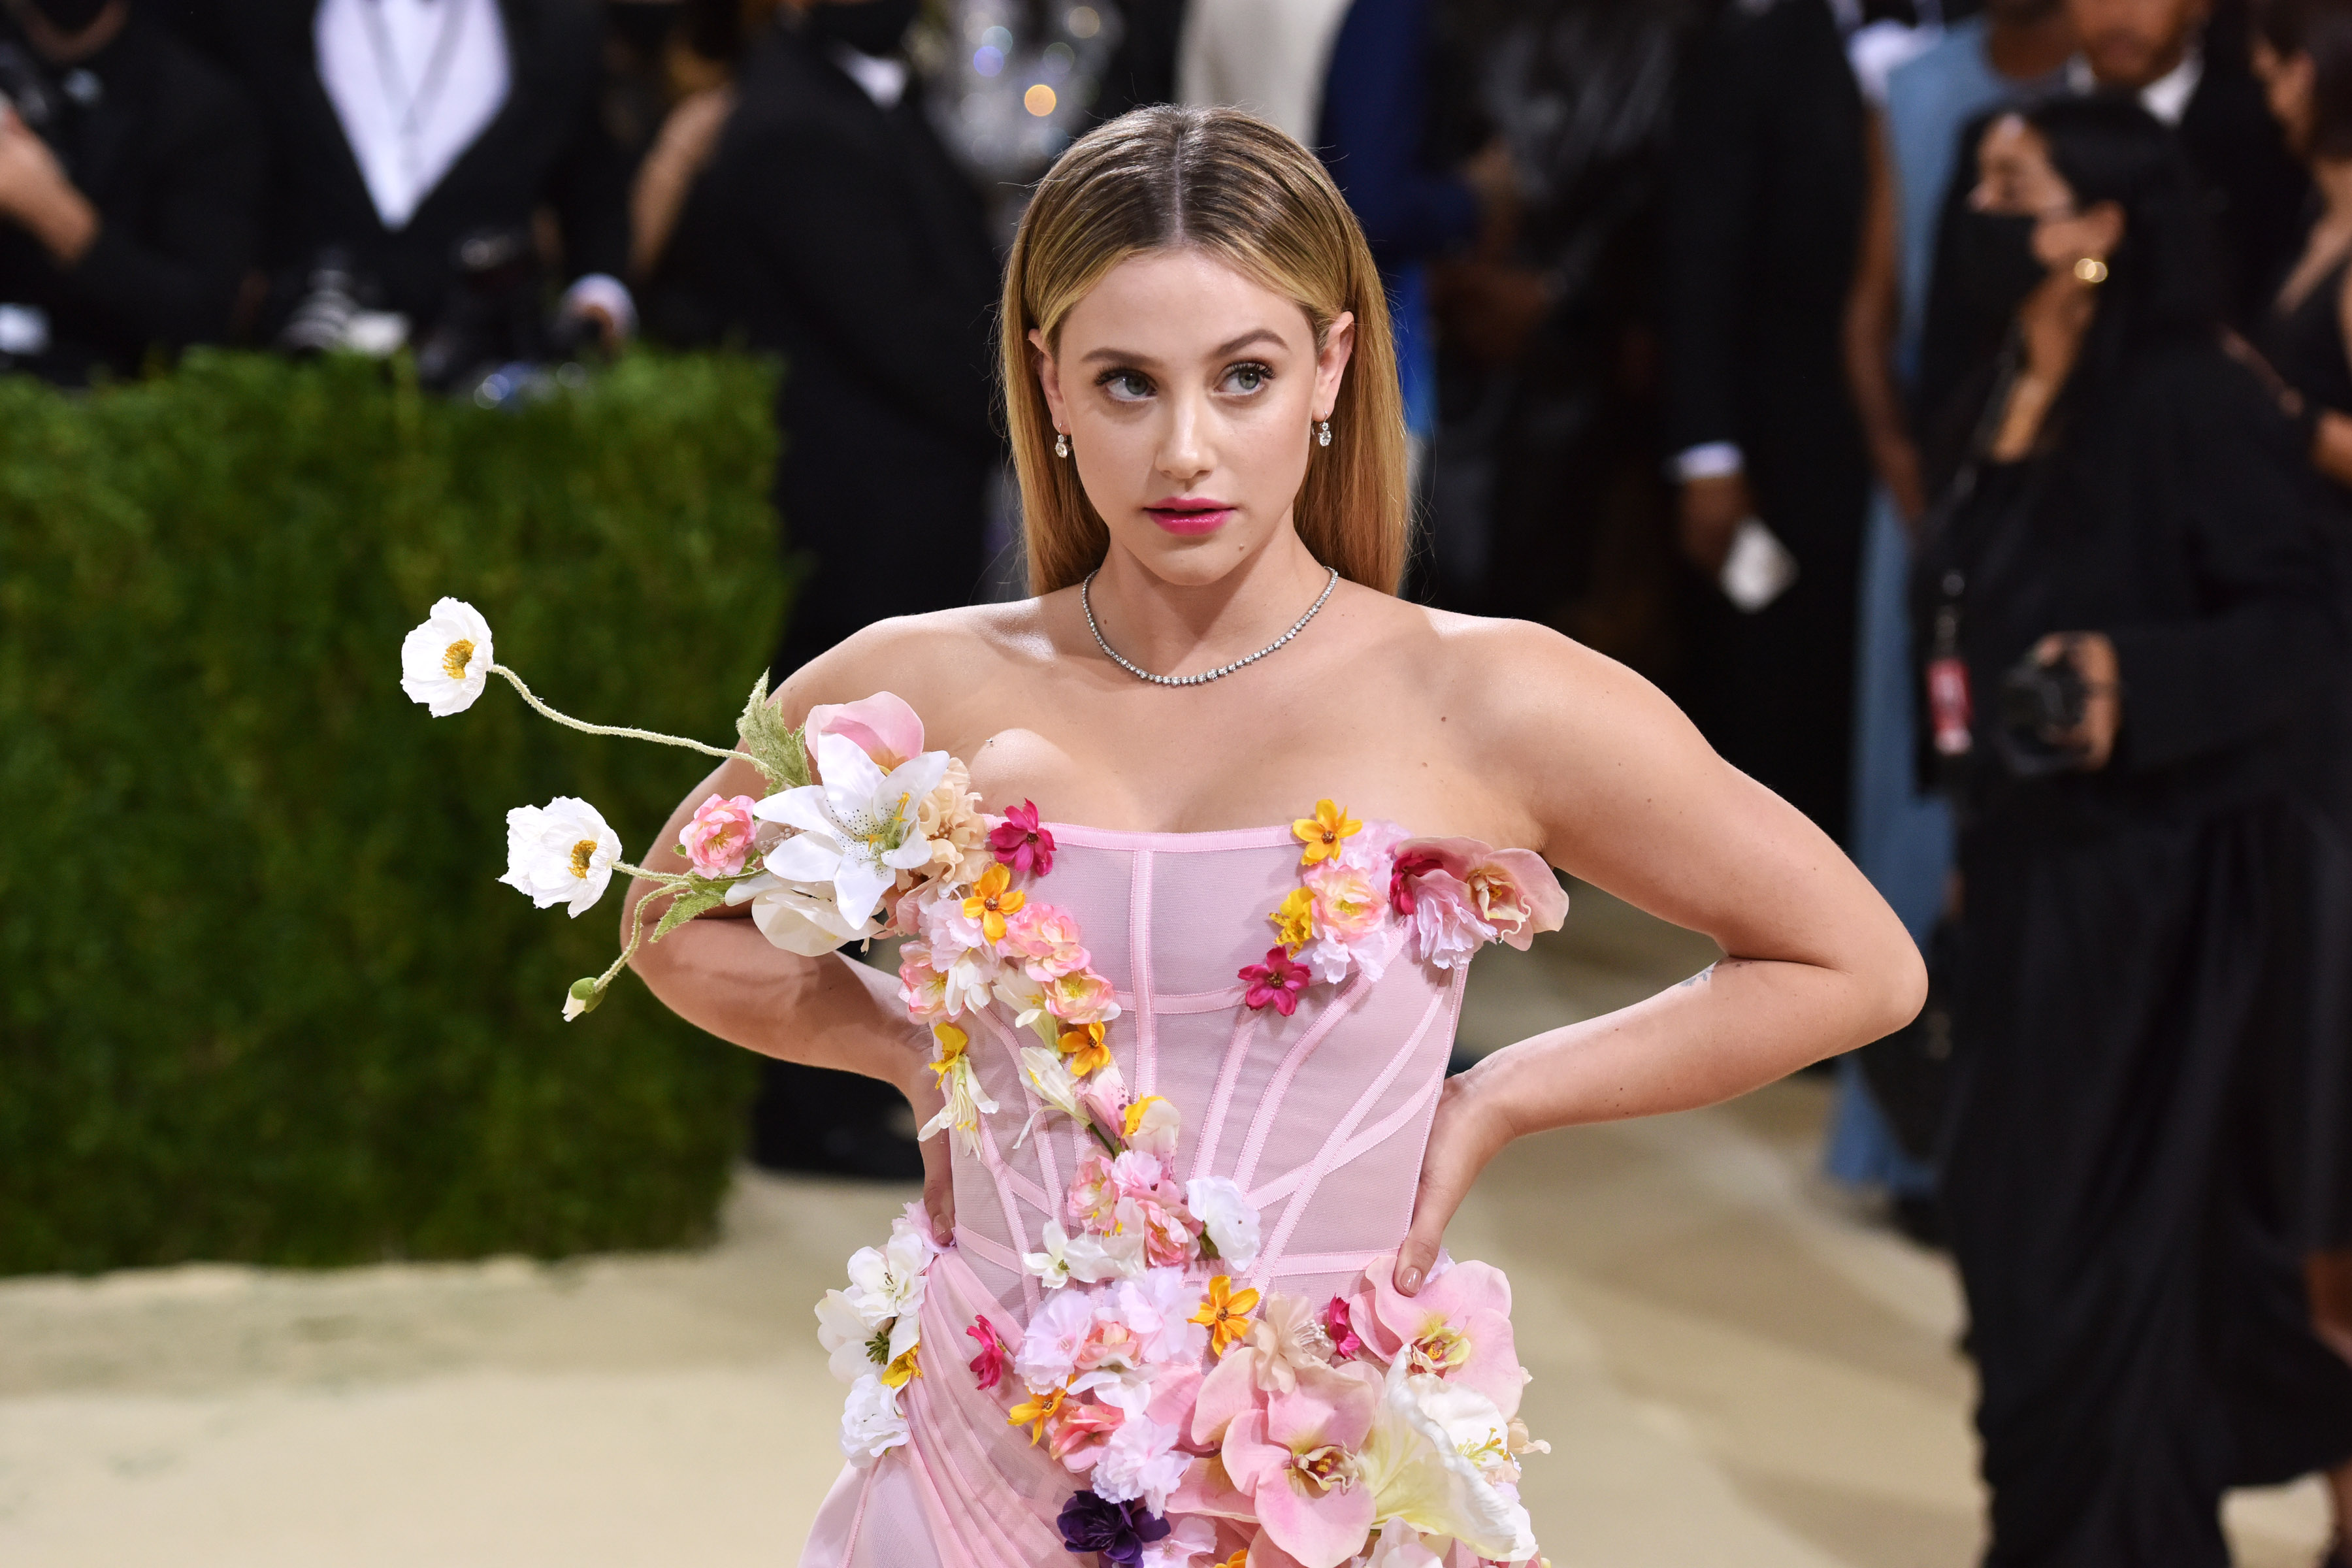 Lili Reinhart at the Met Gala in 2021 in New York | Source: Getty Images